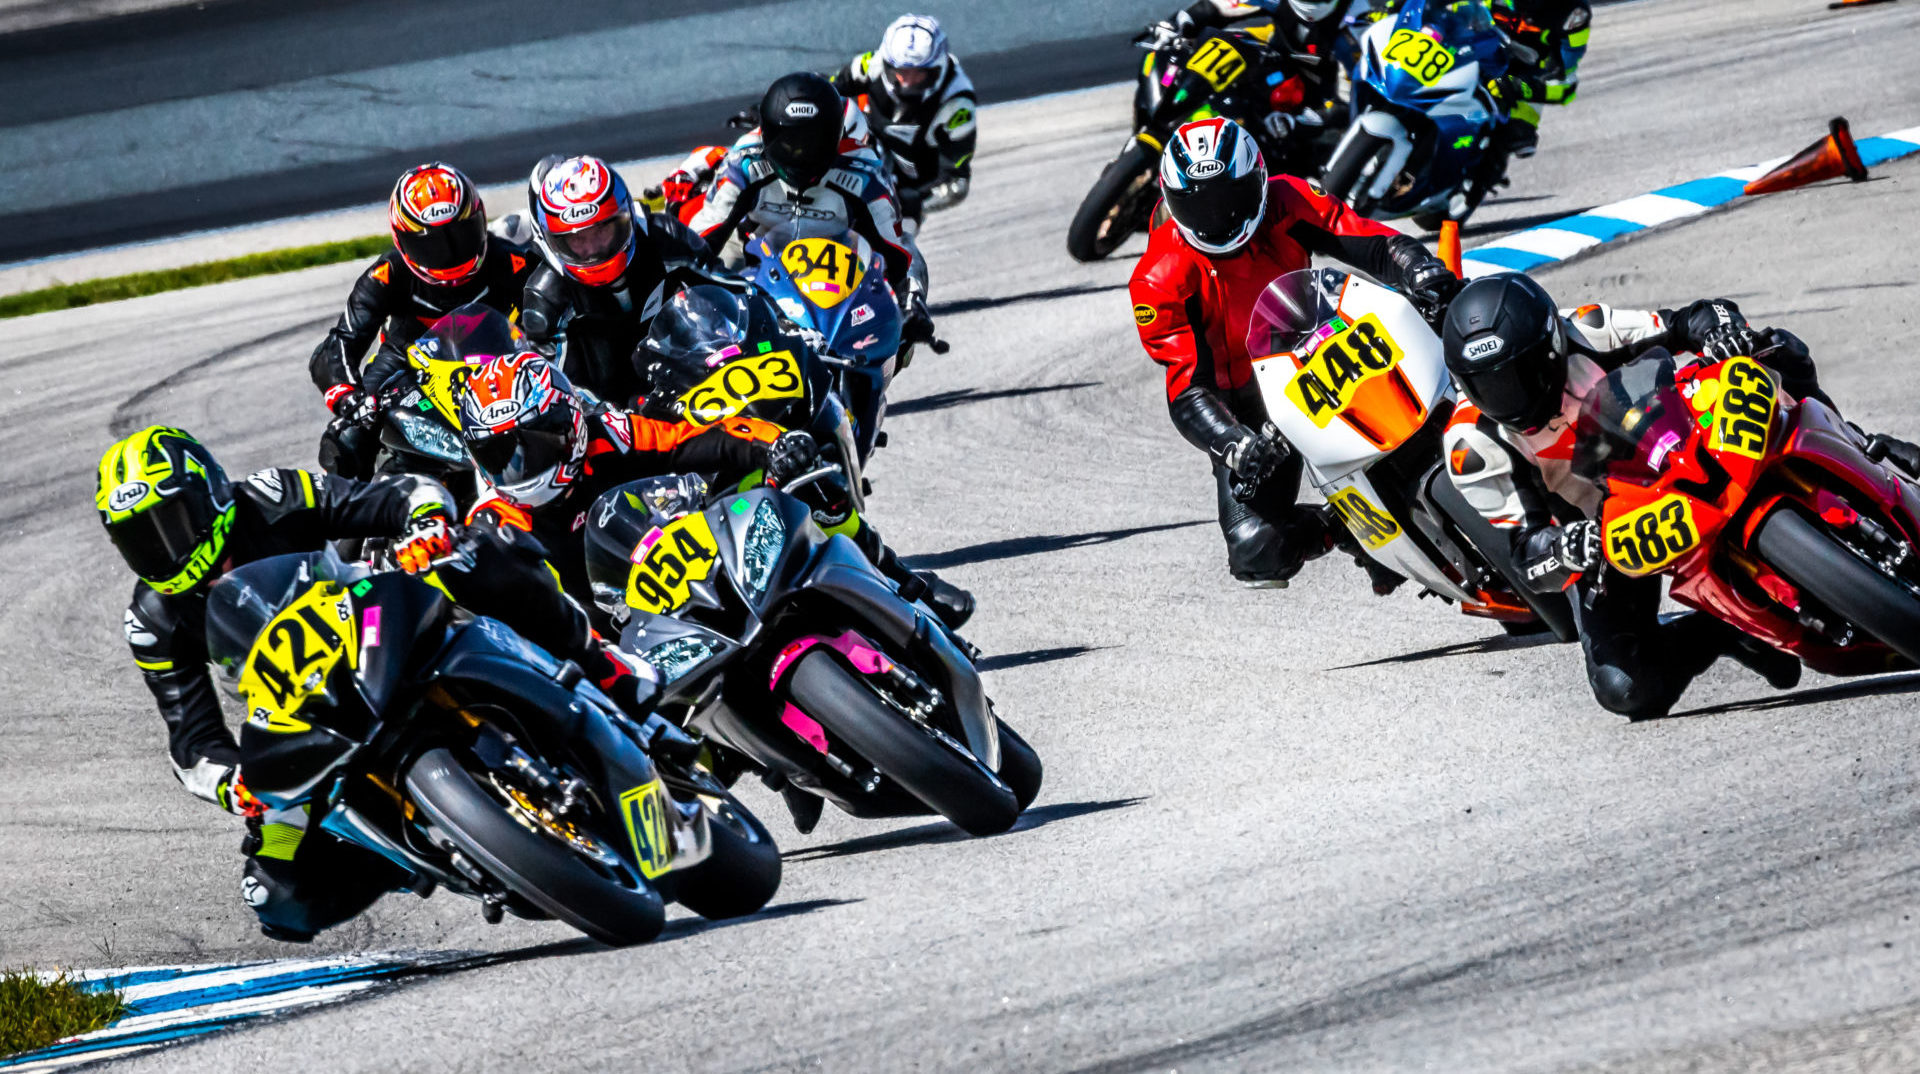 NEMRR racers in action at New Hampshire Motor Speedway. Photo courtesy NEMRR.